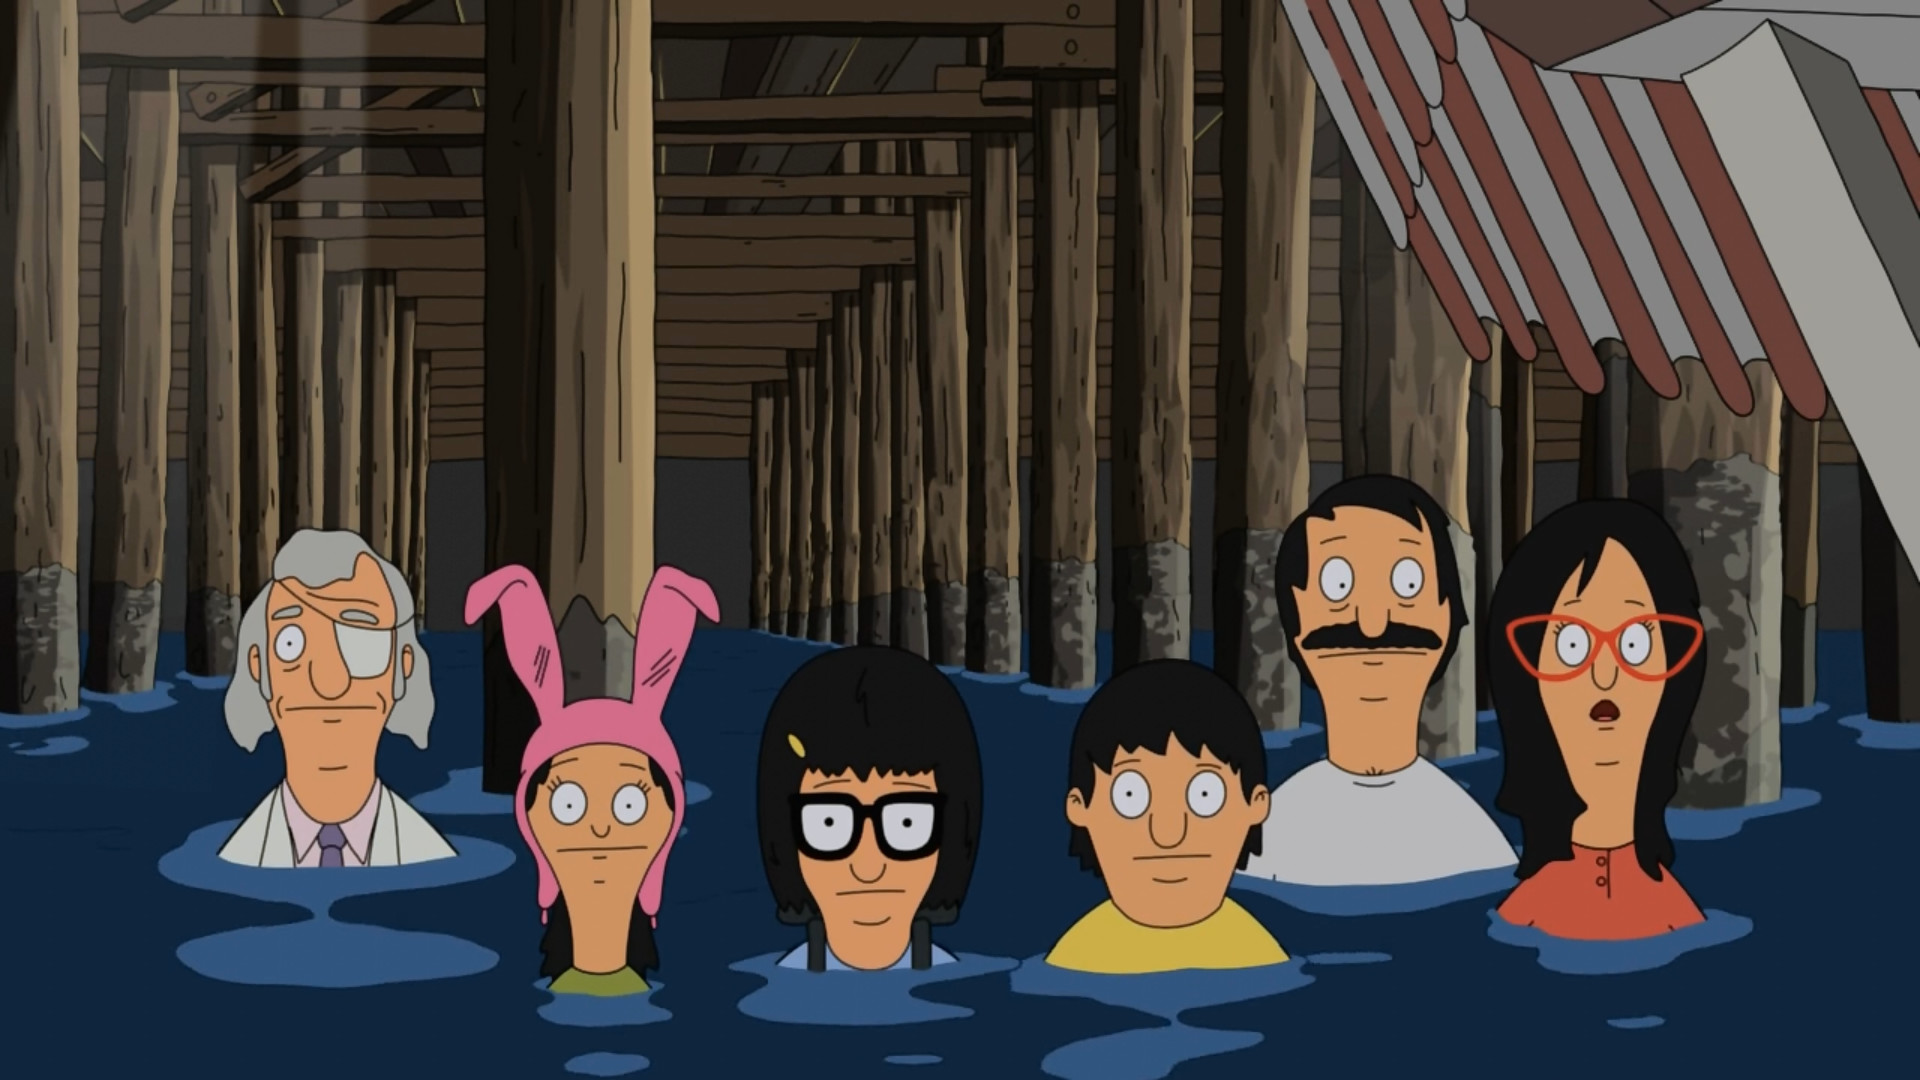 Feel asleep with Bobs Burgers on and my Girlfriend gets up and paused the show on a perfect wallpaper